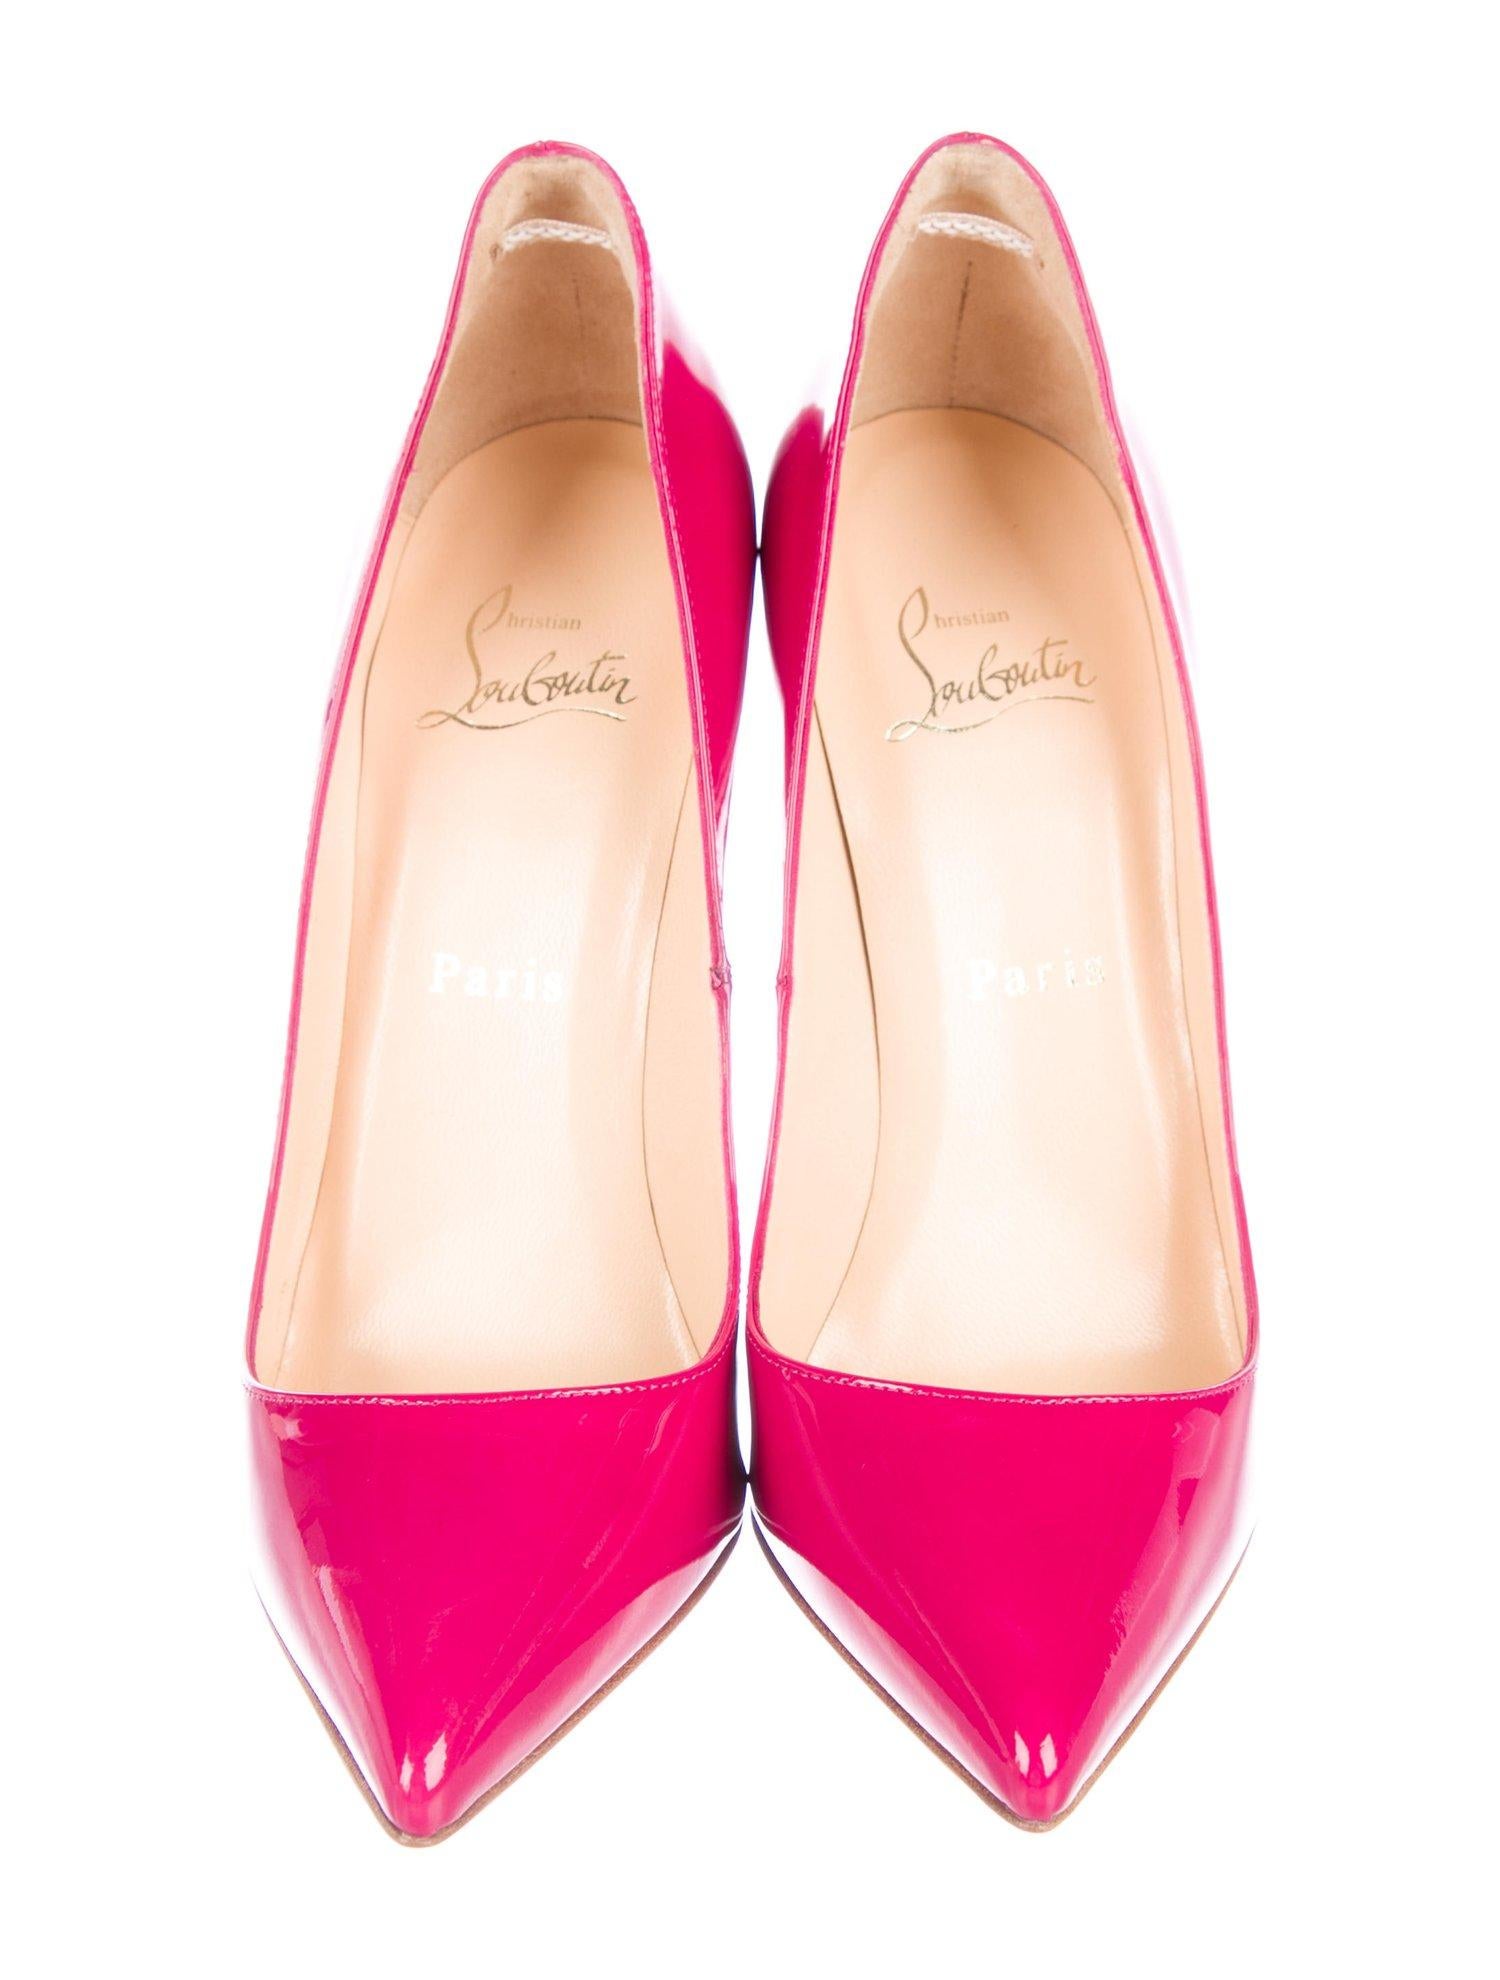 Louboutin Pigalle 120 - 4 For Sale on 1stDibs | christian louboutin pigalle  120, christian louboutin pigalle, pigalle 120mm